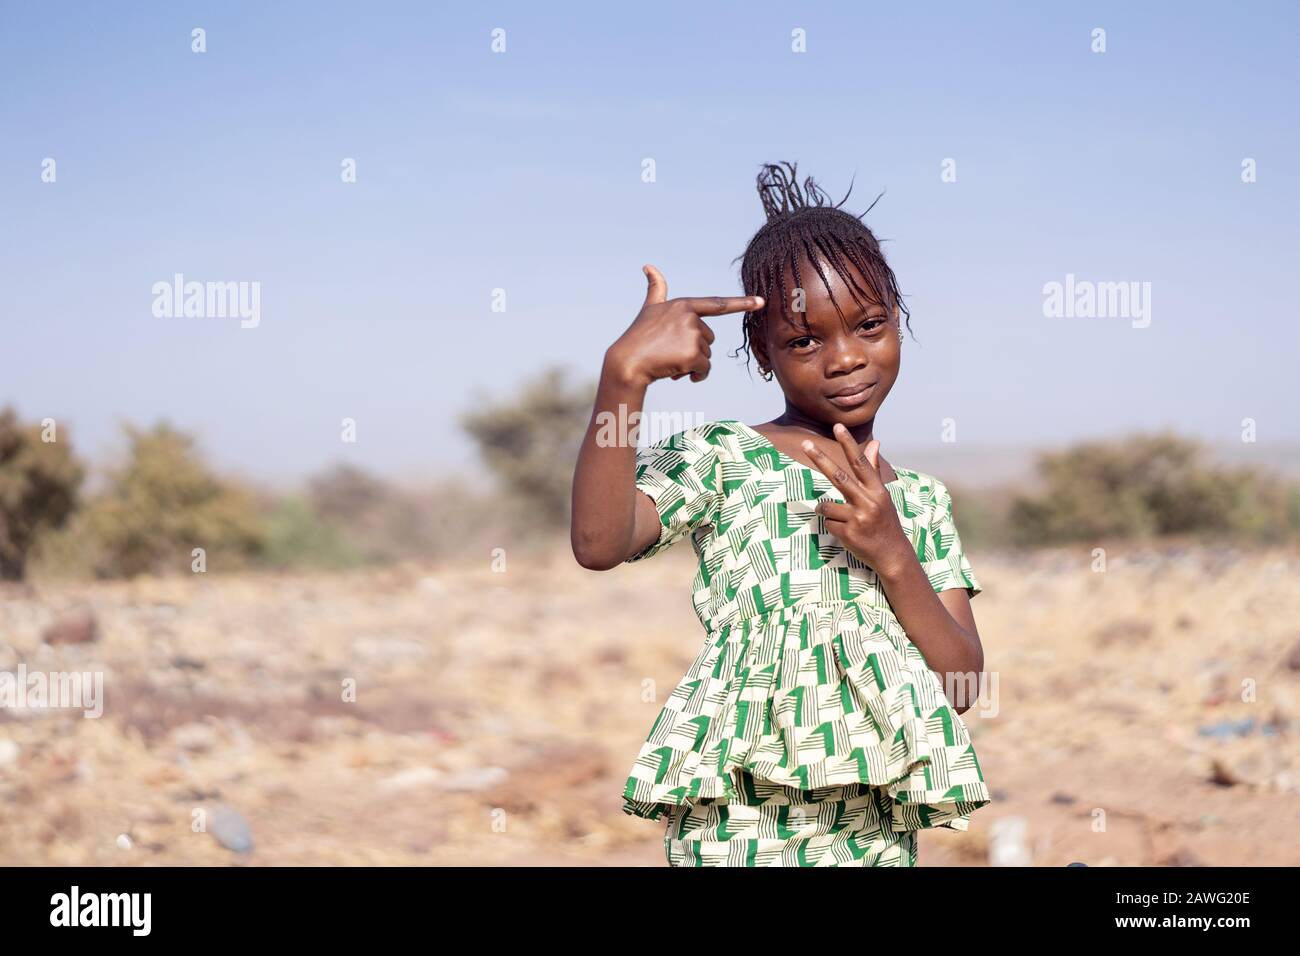 Little and cute African girl posing for the camera with hand gestures Stock Photo